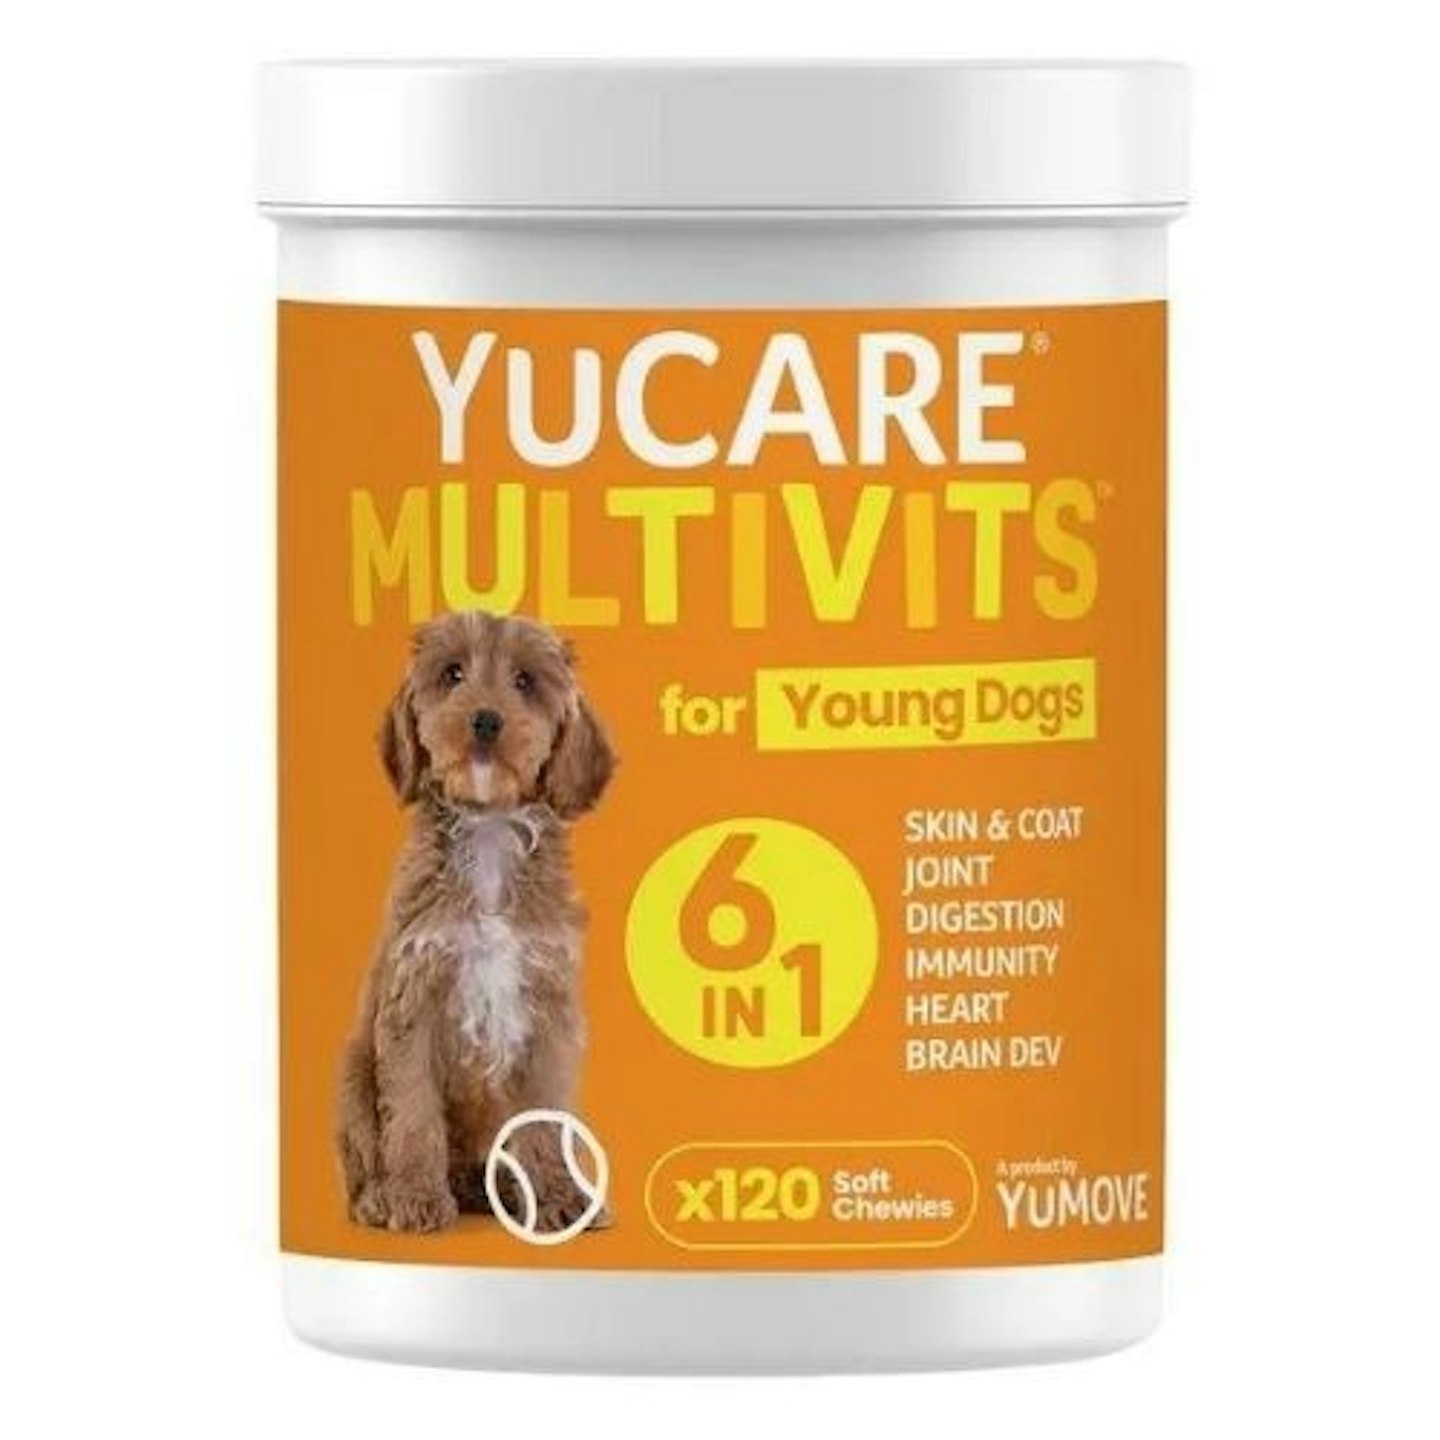 YuCARE MultiVits for Young Dogs